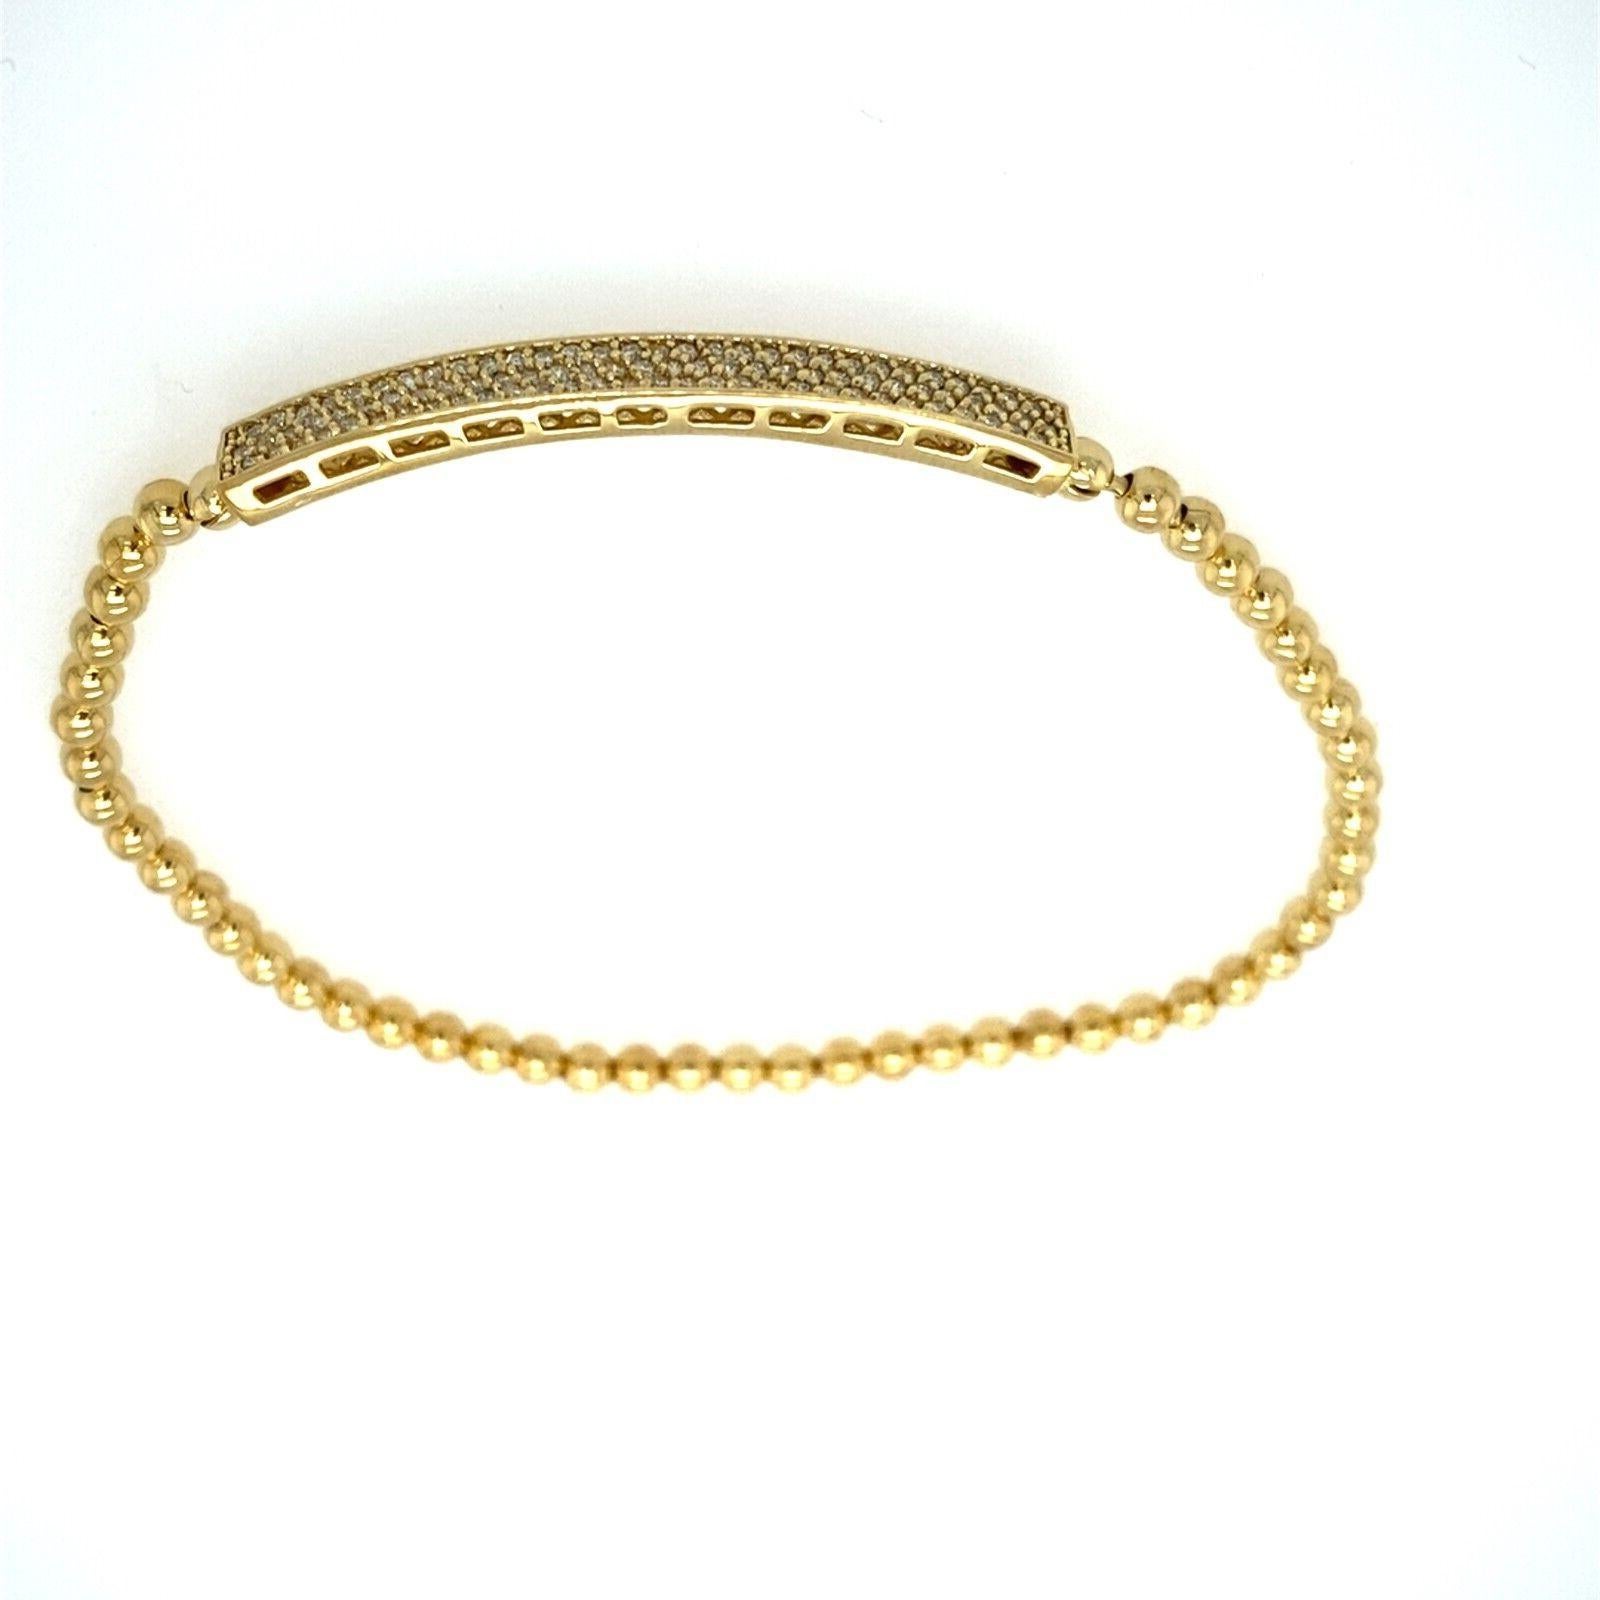 3-Row Bar Diamond Bracelet with 3mm Beads on Bracelet in 18ct Yellow Gold In New Condition For Sale In London, GB